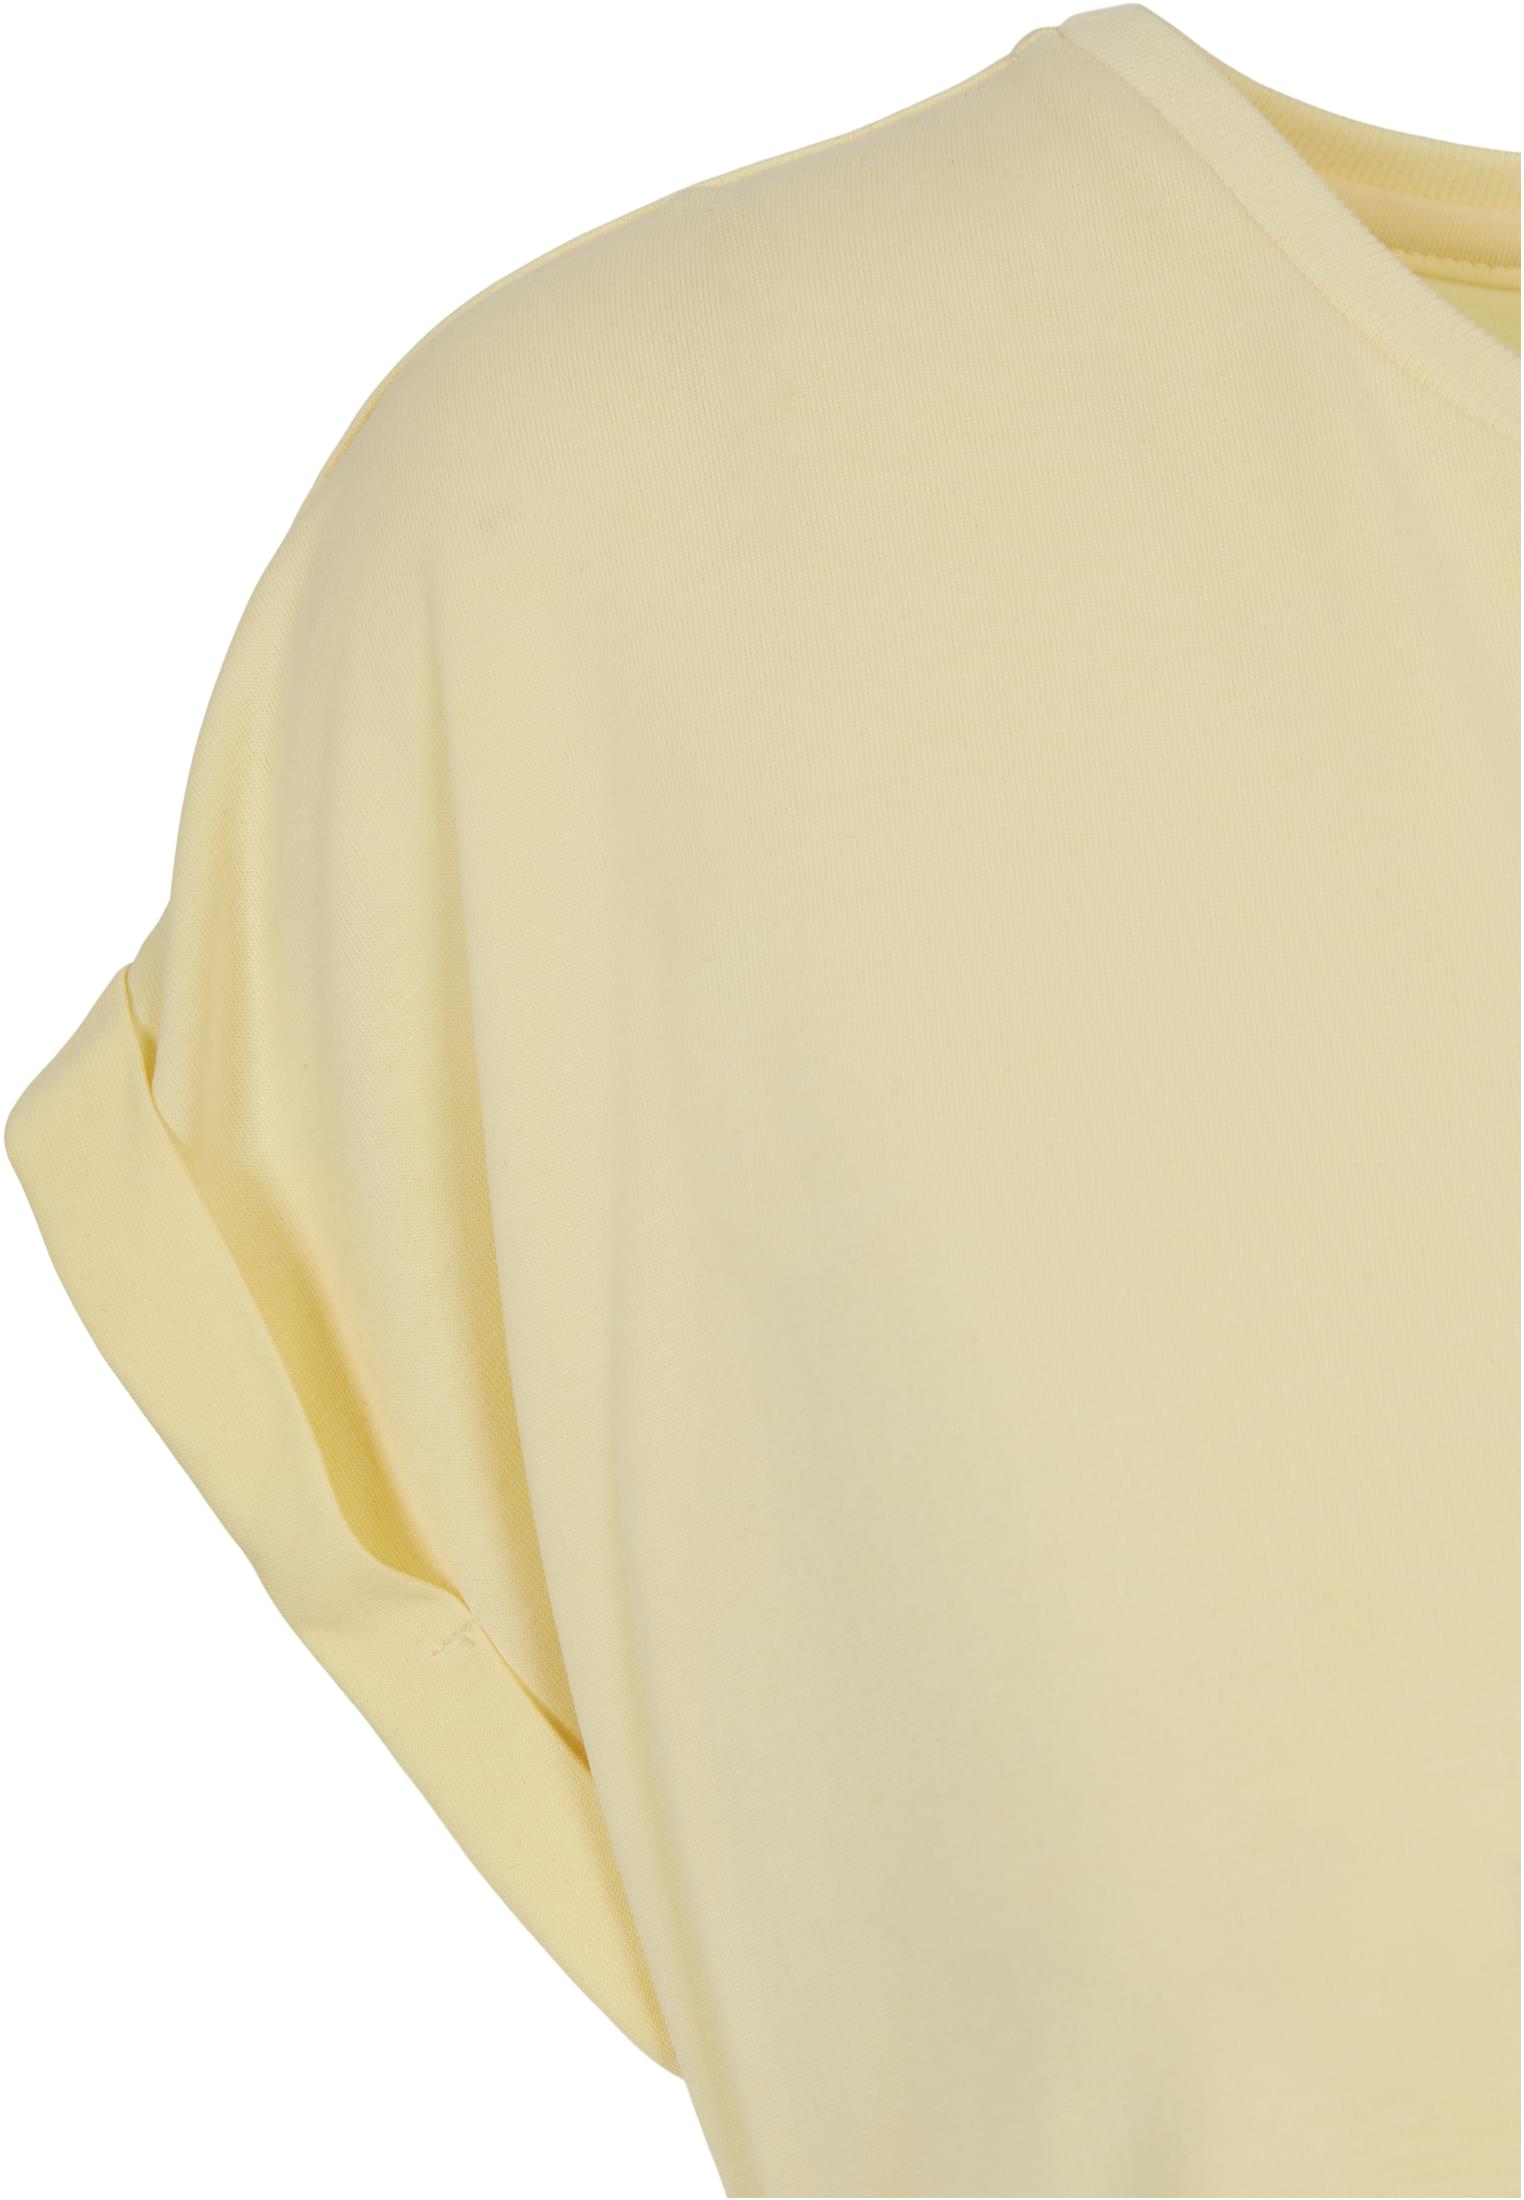 Frauen Ladies Modal Extended Shoulder Tee in Farbe softyellow